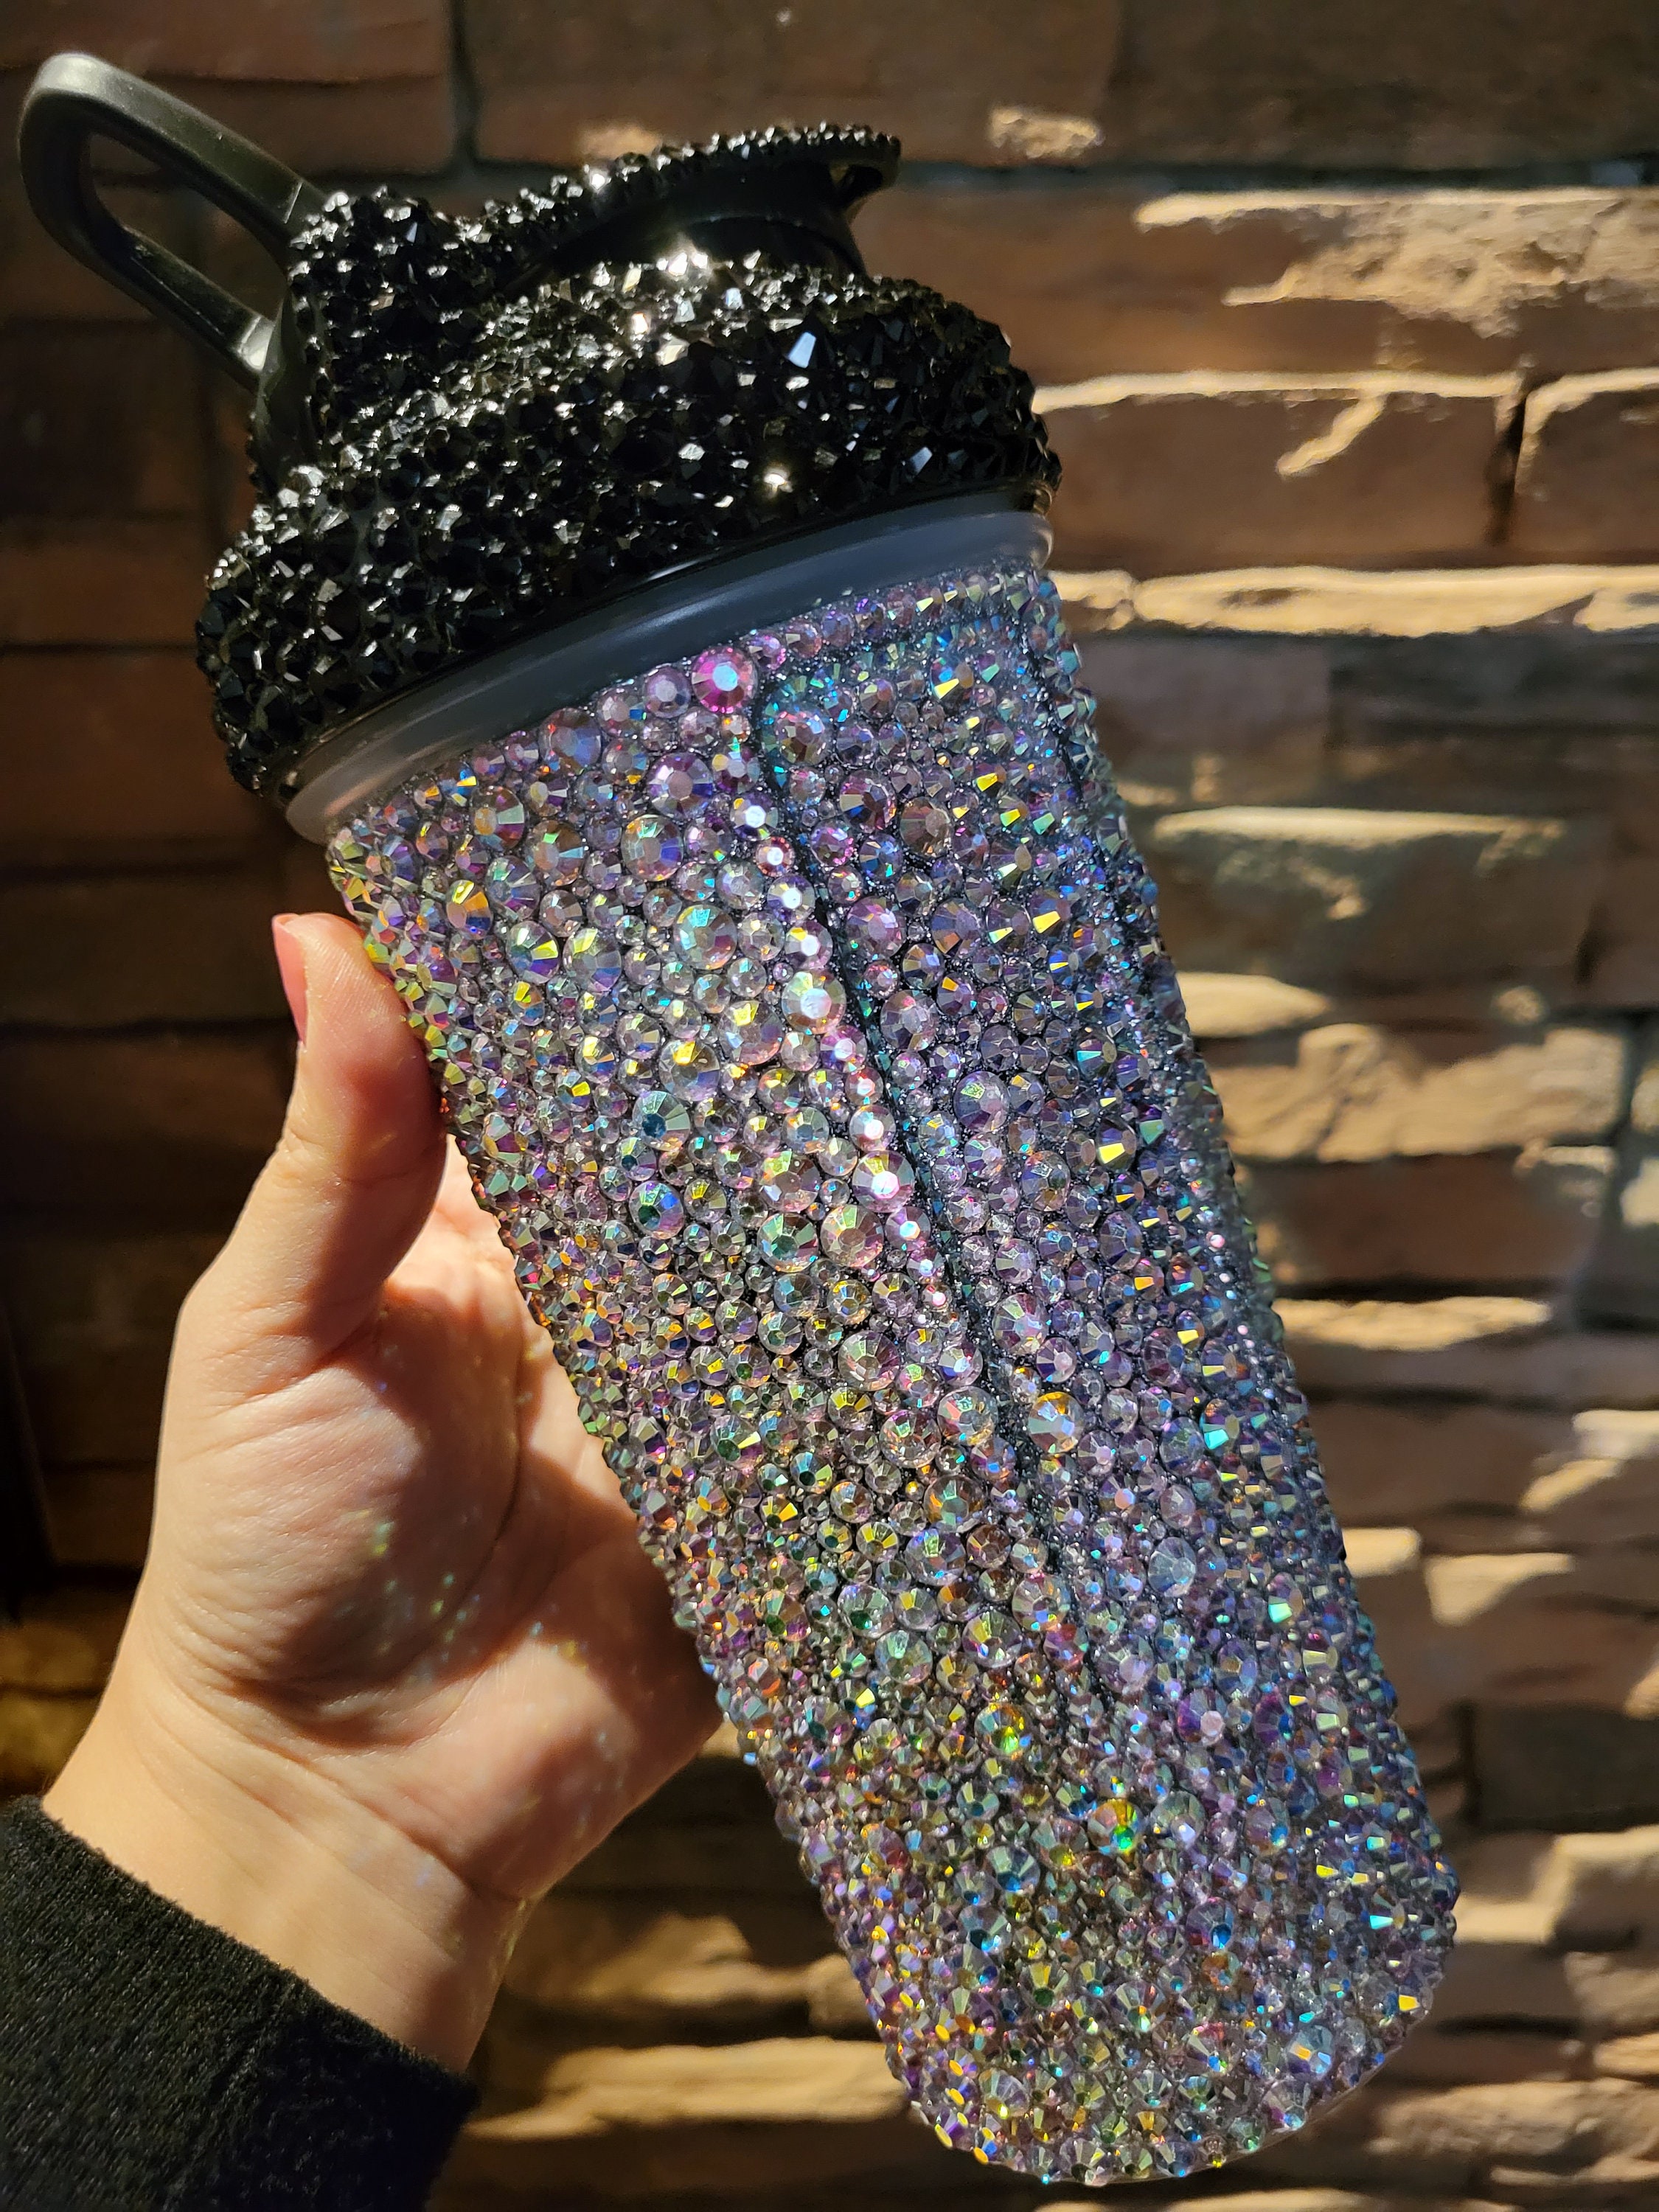 Mix Your Protein In Style With Custom Protein Shakers – Custom